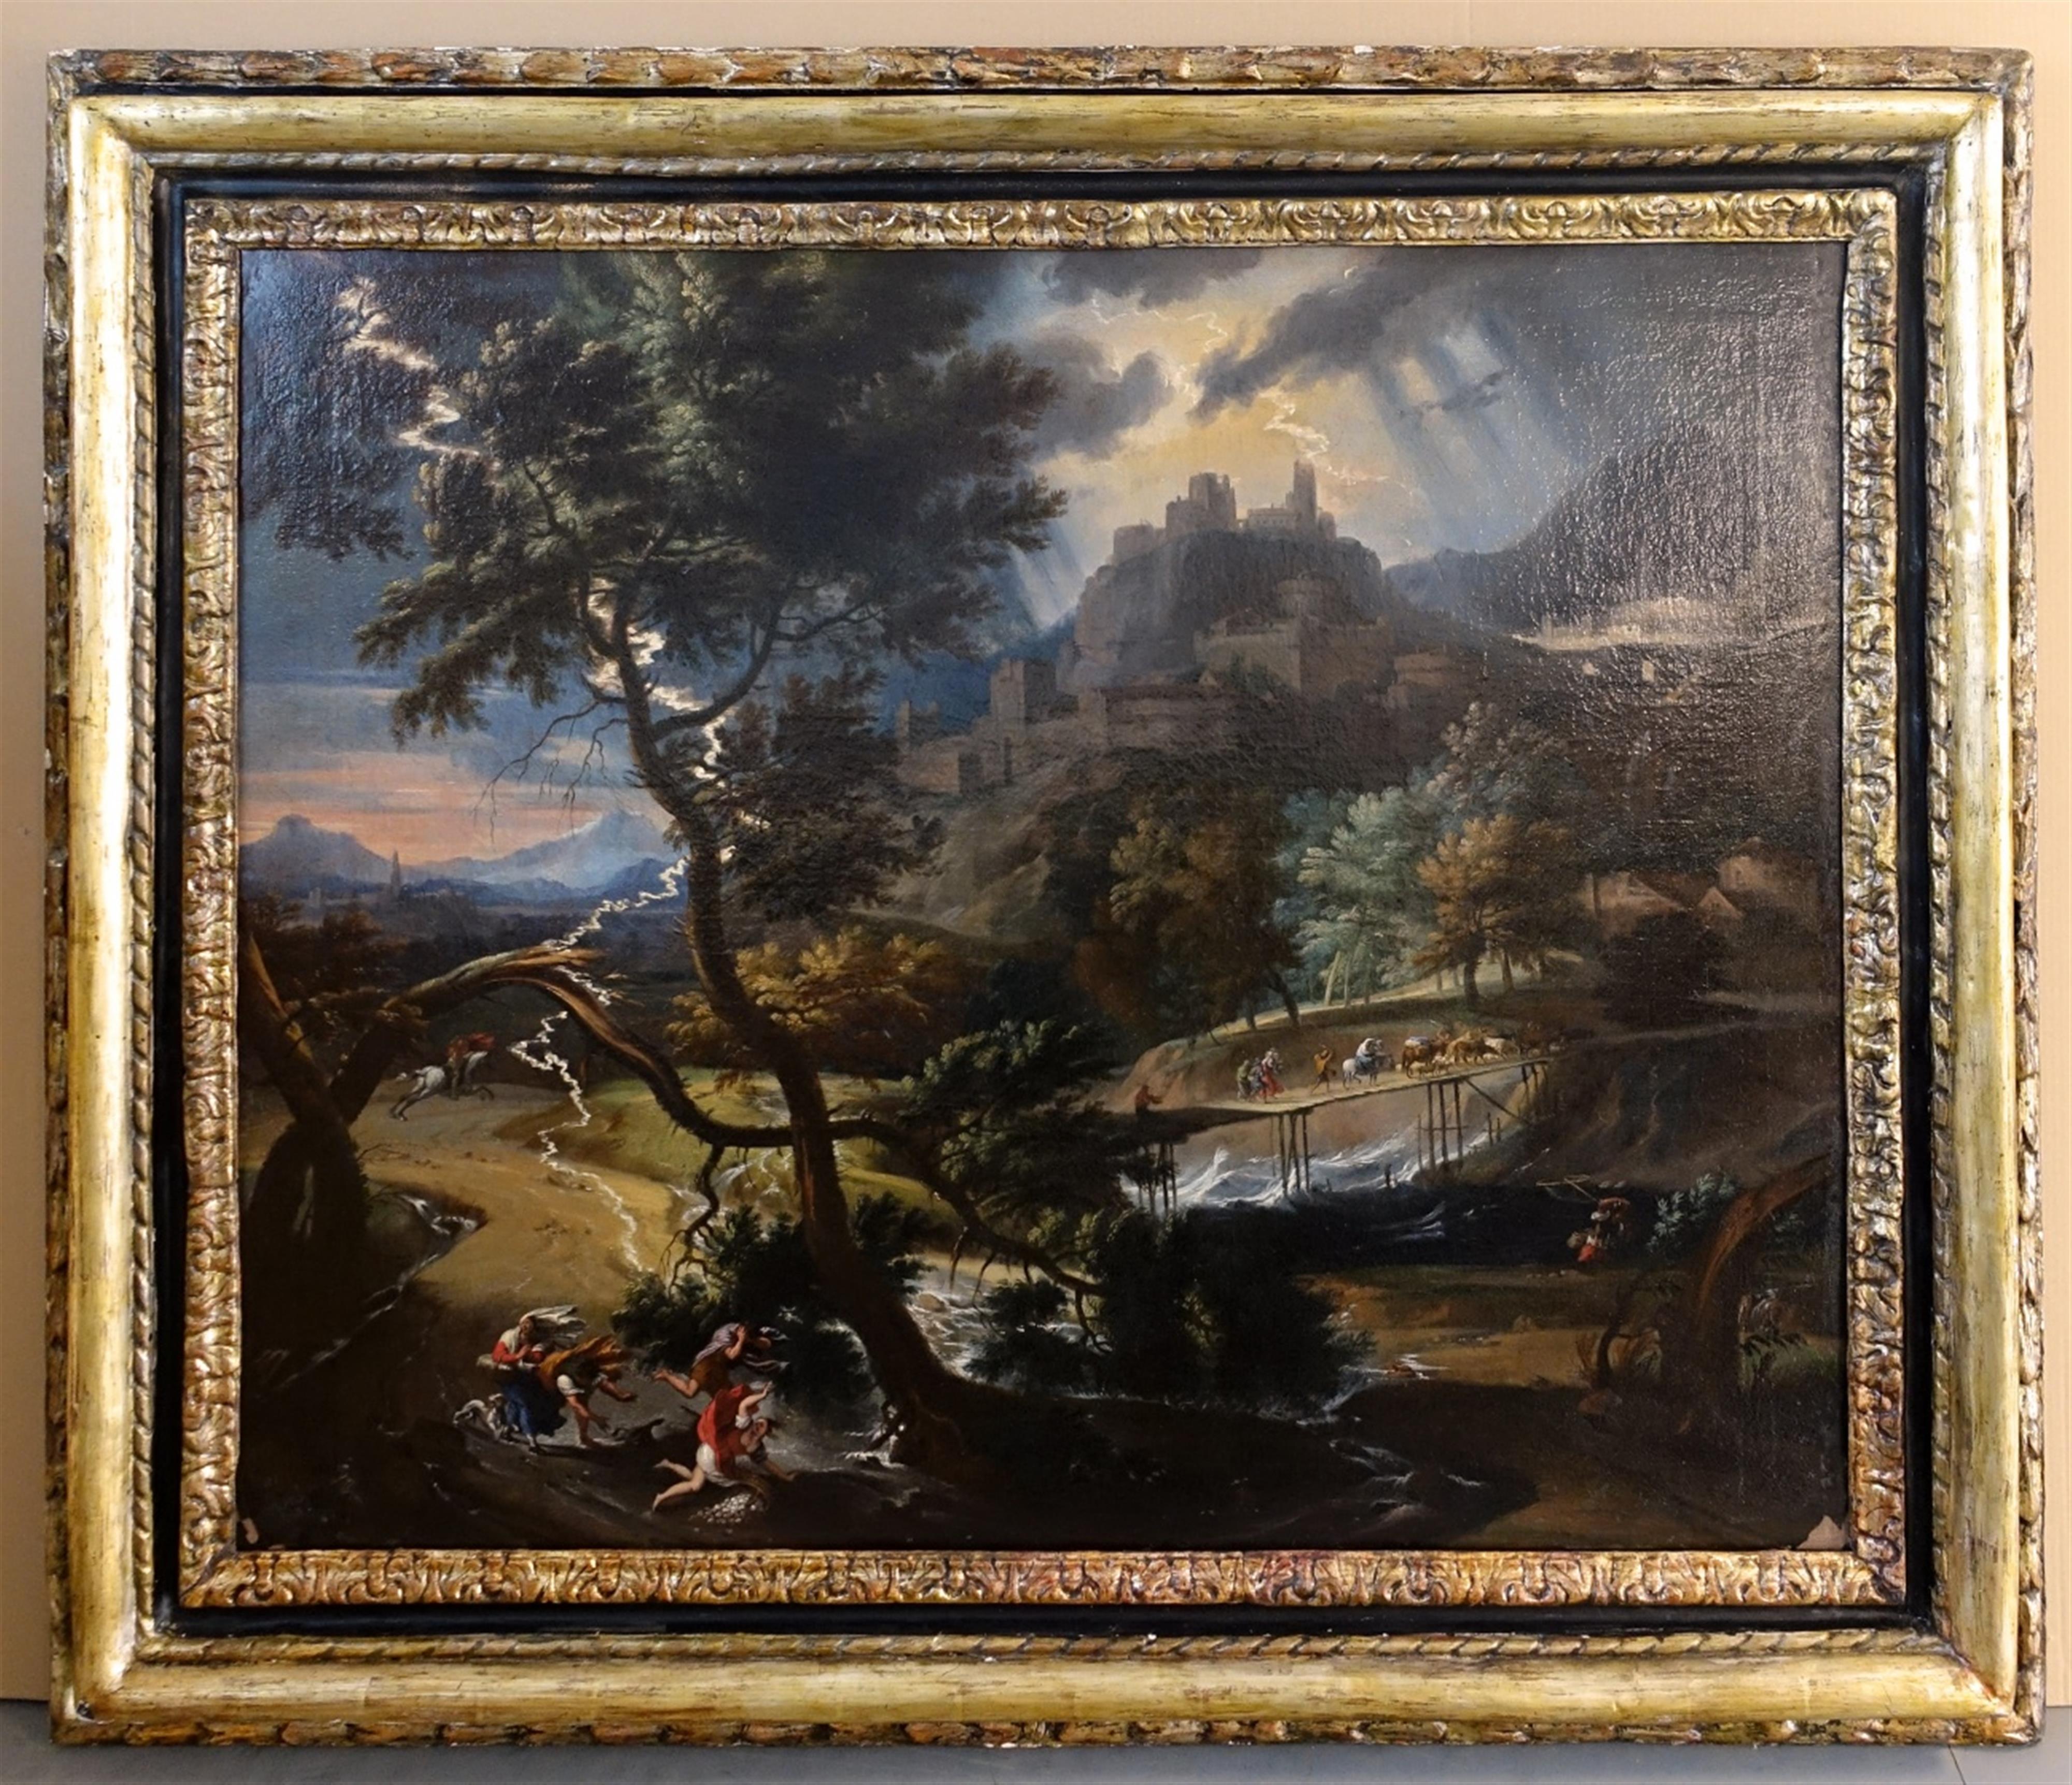 Pieter Mulier, called Tempesta - Landscape with Figures Fleeing from a Storm - image-2